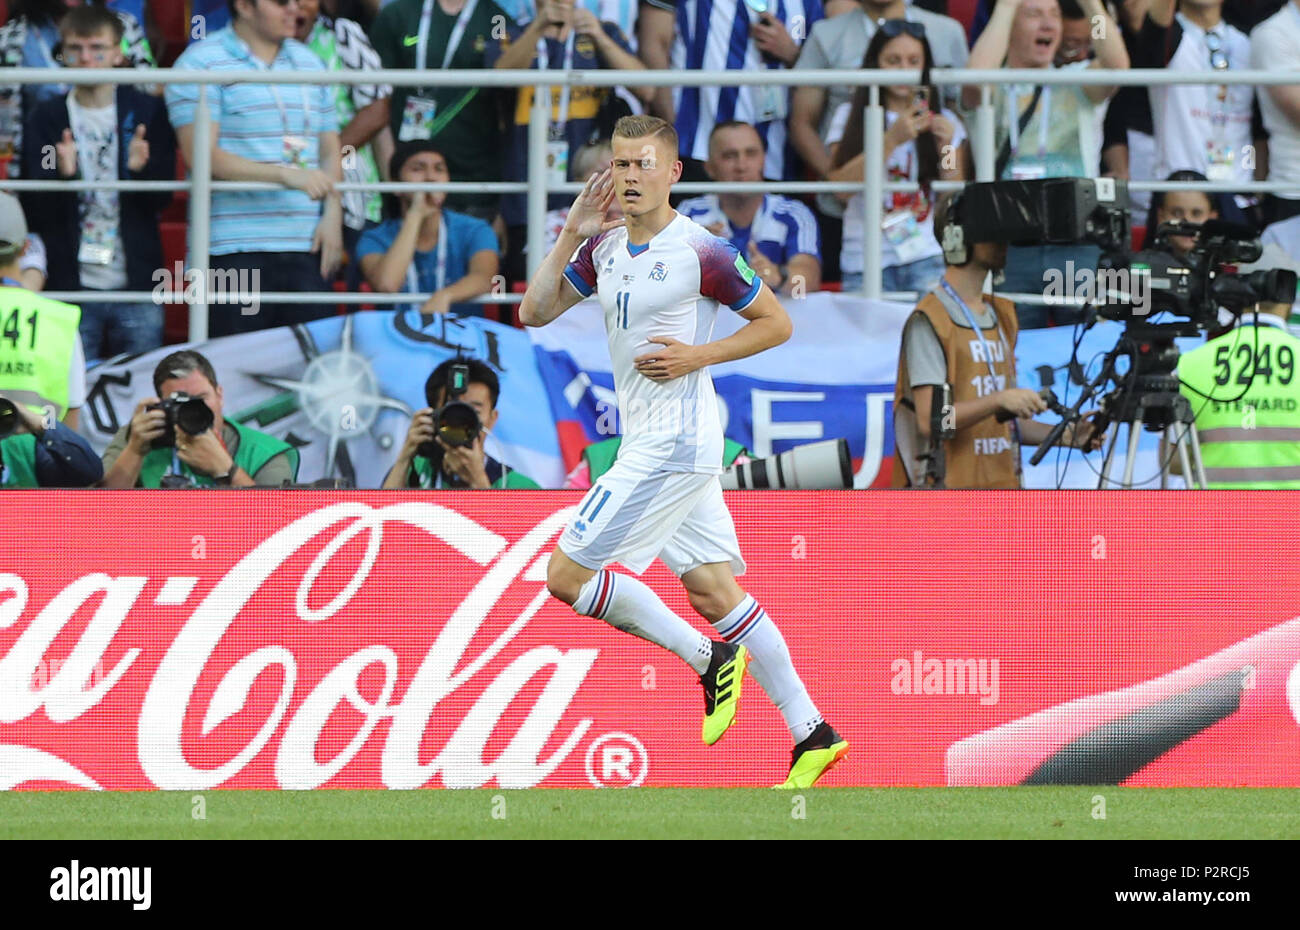 Moscow, Russia. 16th June, 2018. Alfred Finnbogason of Iceland celebrates his scoring during a group D match between Argentina and Iceland at the 2018 FIFA World Cup in Moscow, Russia, June 16, 2018. Credit: Xu Zijian/Xinhua/Alamy Live News Stock Photo